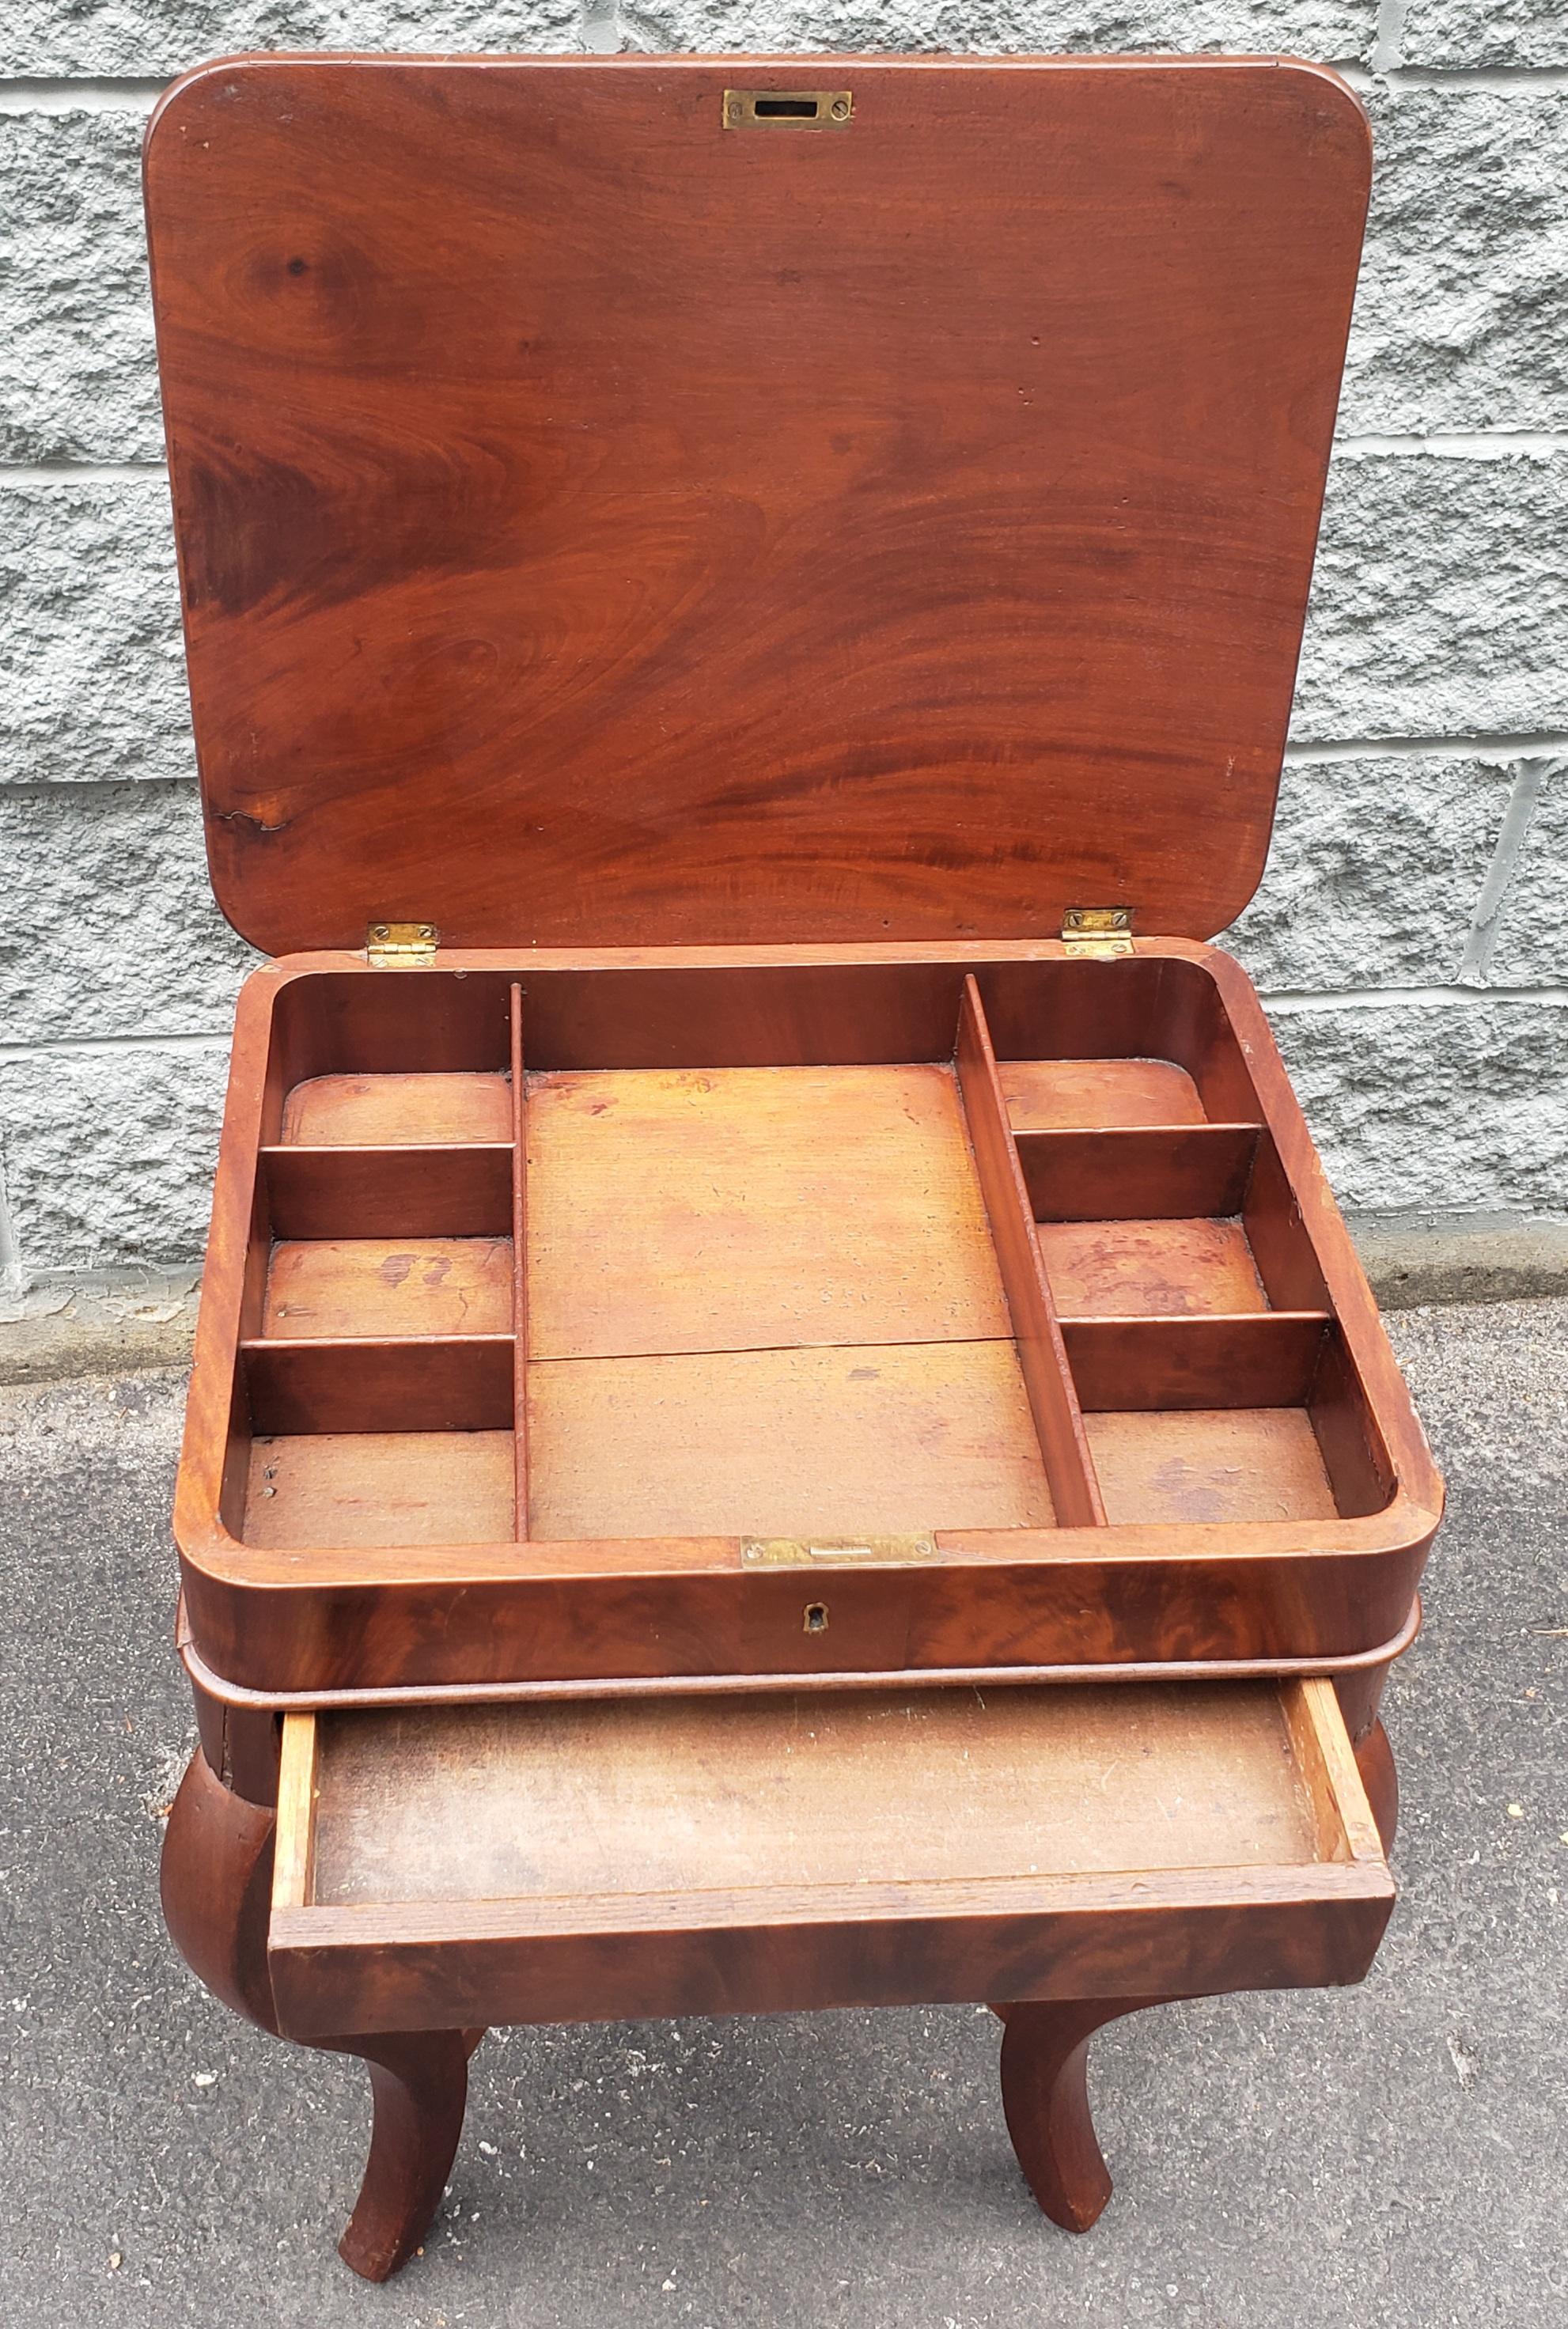 19th Century American Empire One-Drawer Flame Mahogany Sewing or Work Table In Good Condition For Sale In Germantown, MD